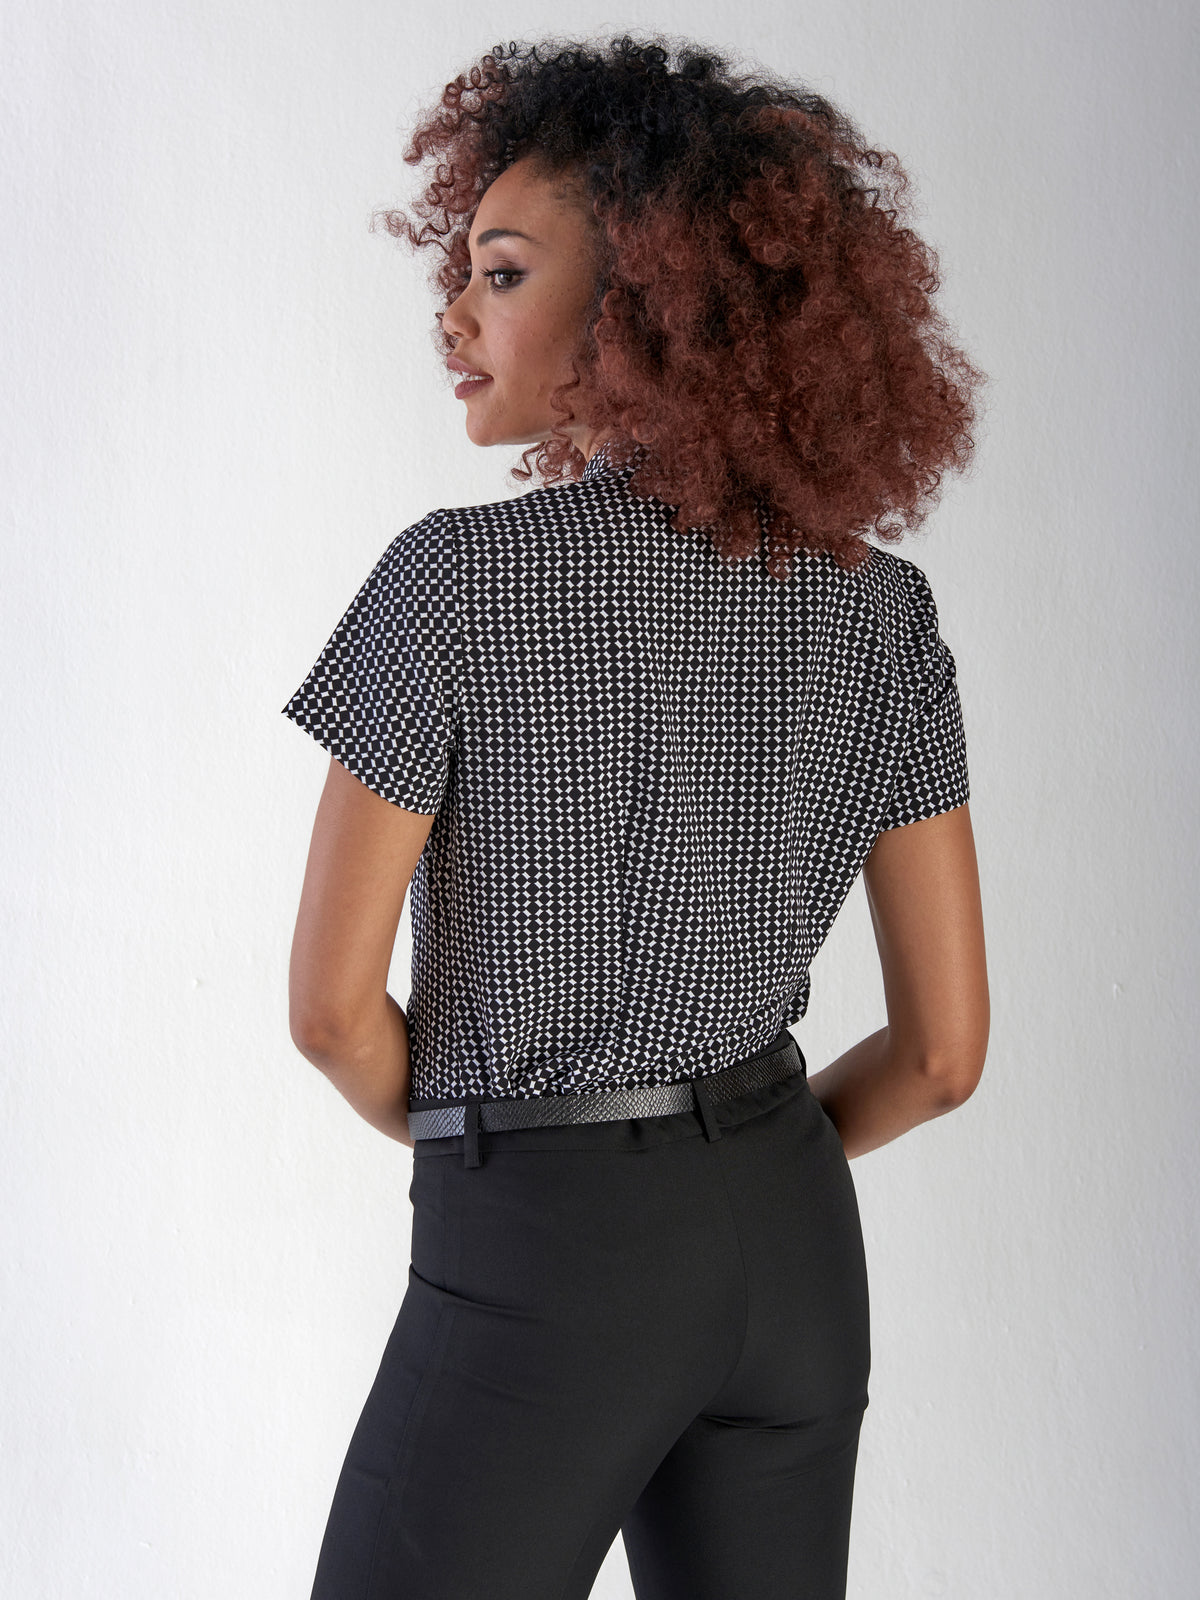 Carrie classic buttoned shirt - blk/white